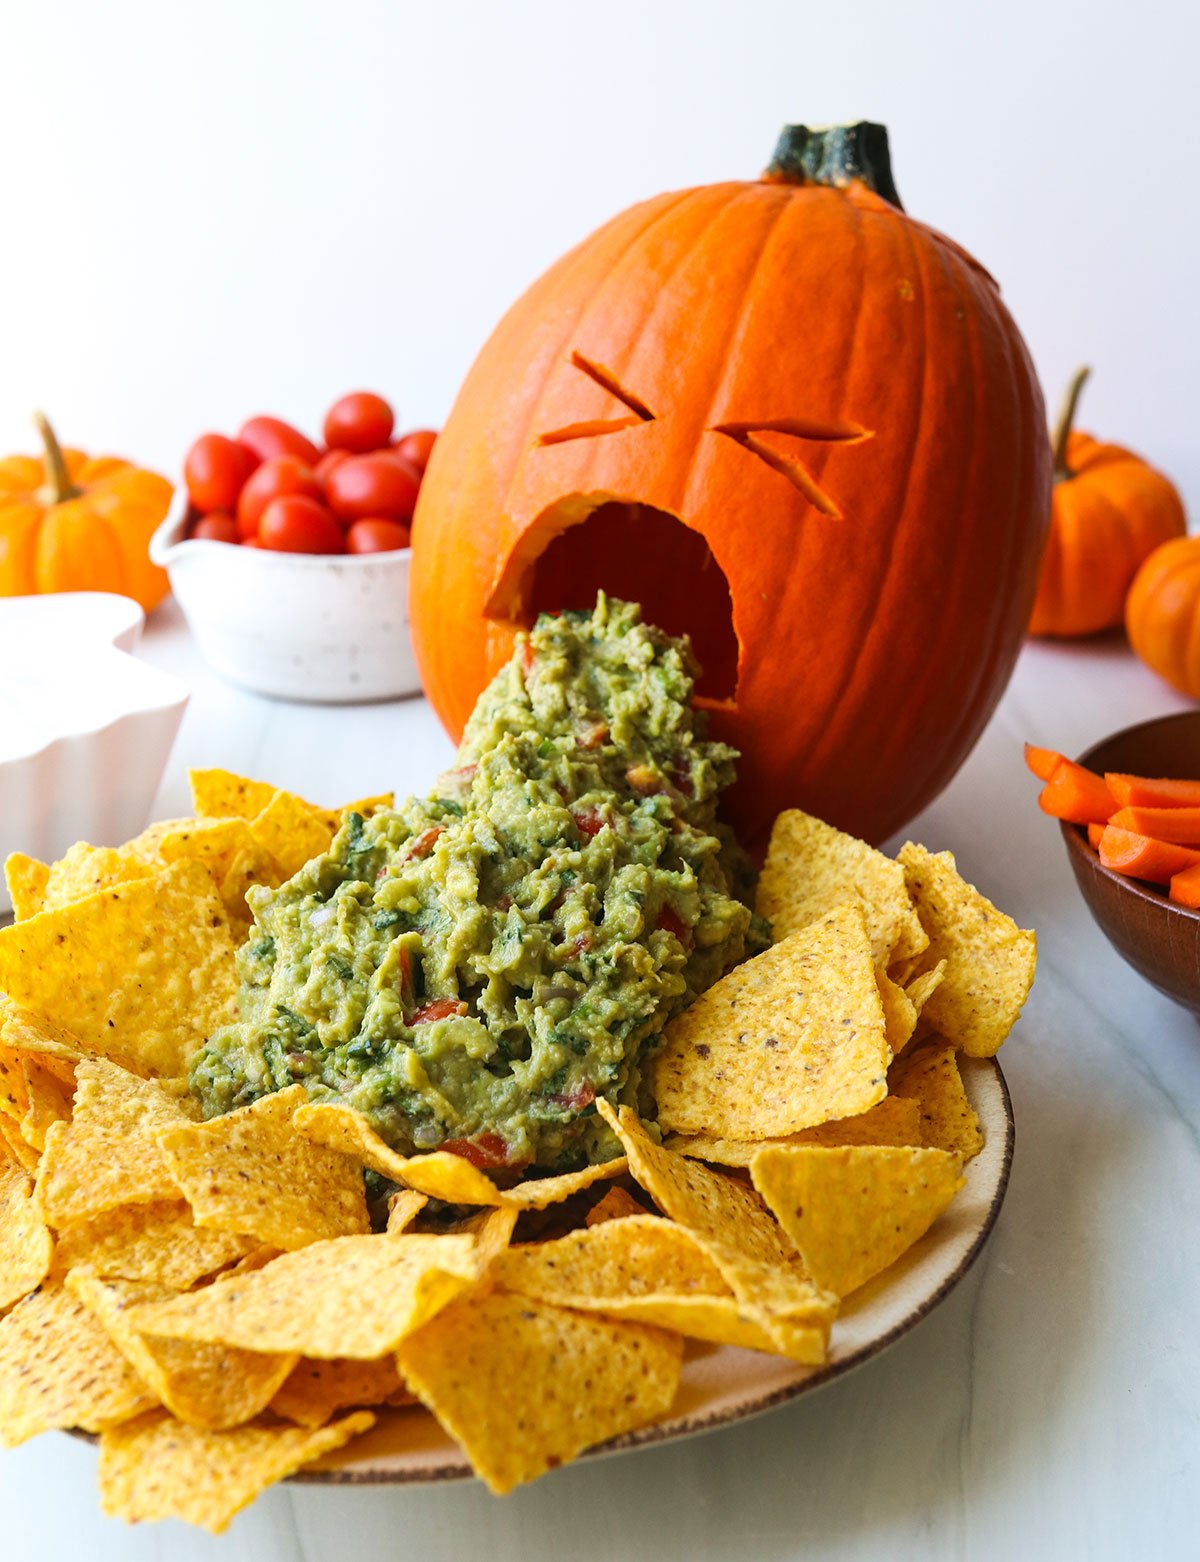 A carved pumpkin that looks like it's puking guacamole onto a plate.